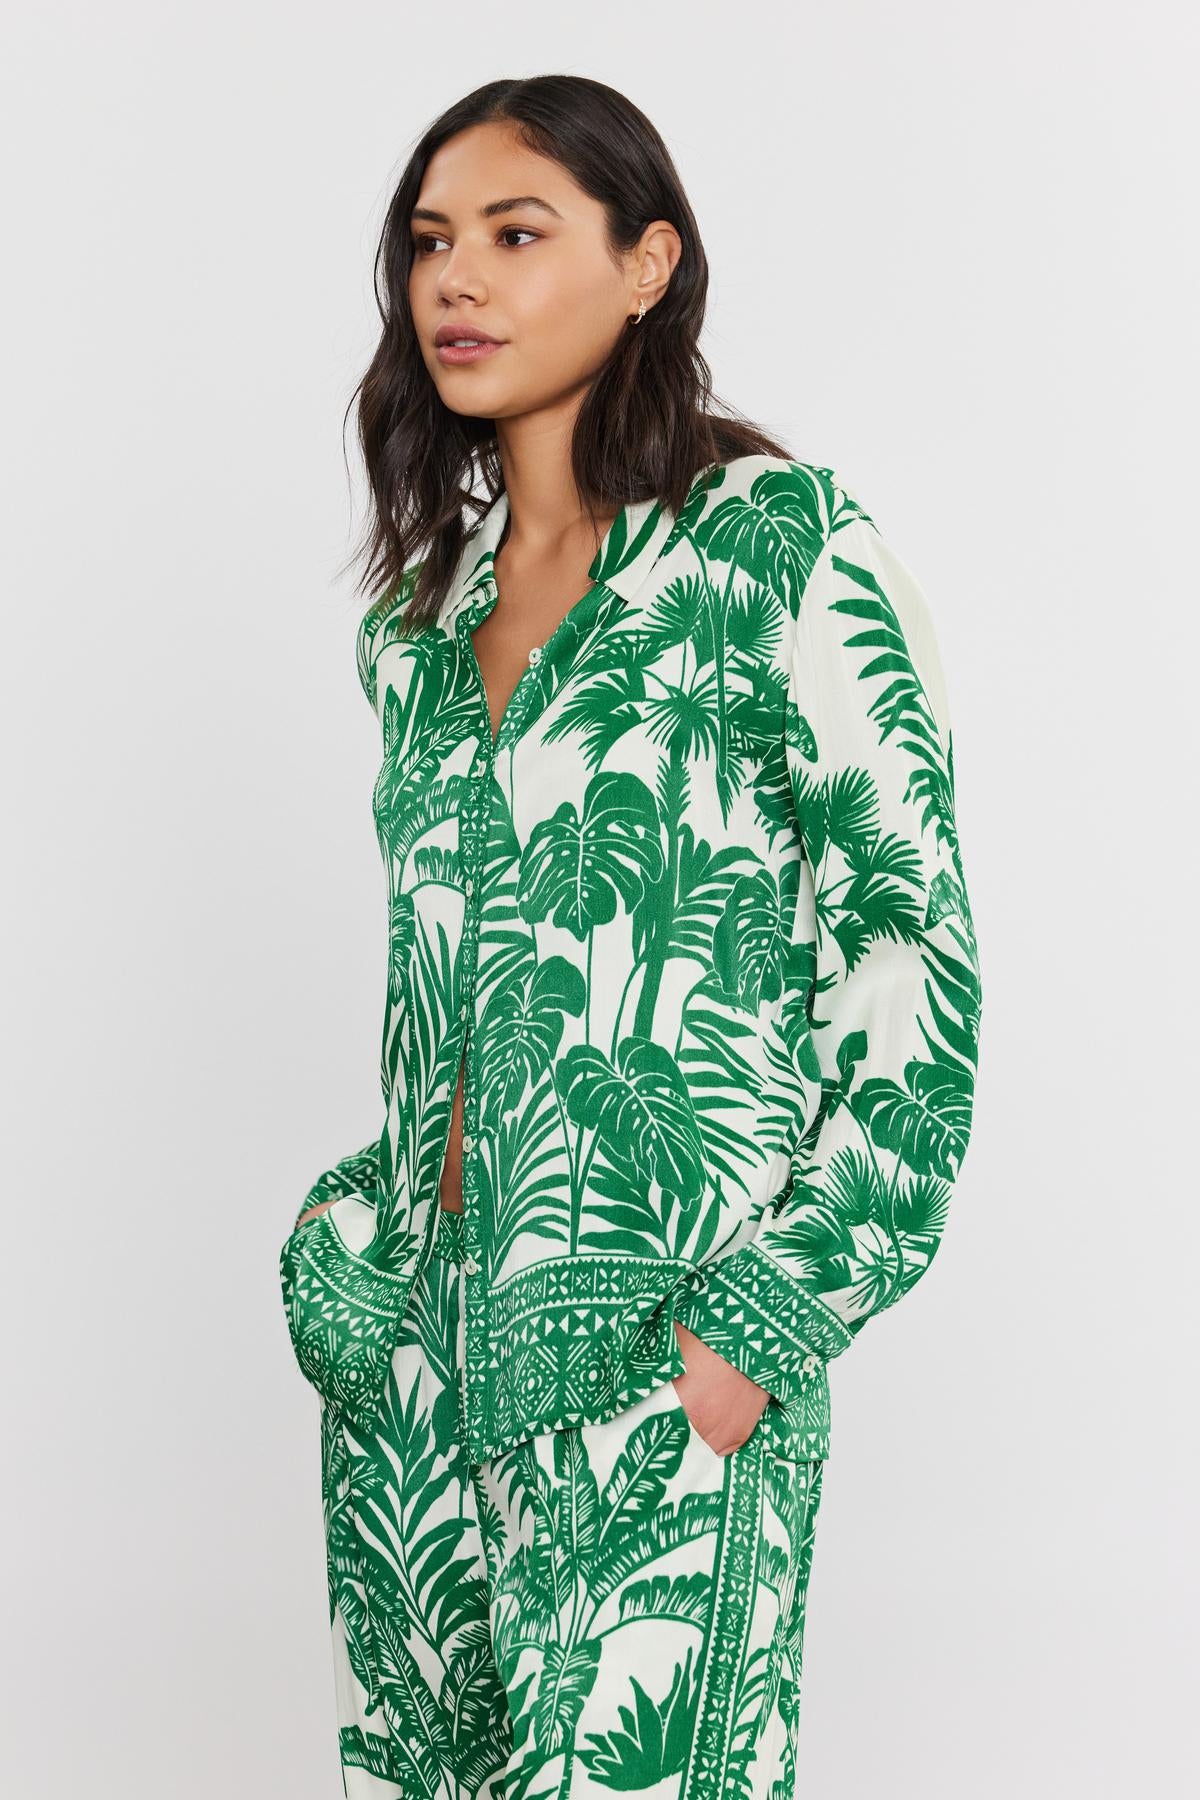   A woman stands wearing a green and white palm print AYLA BUTTON-UP SHIRT pajama set by Velvet by Graham & Spencer, looking to the side, with a calm expression. 